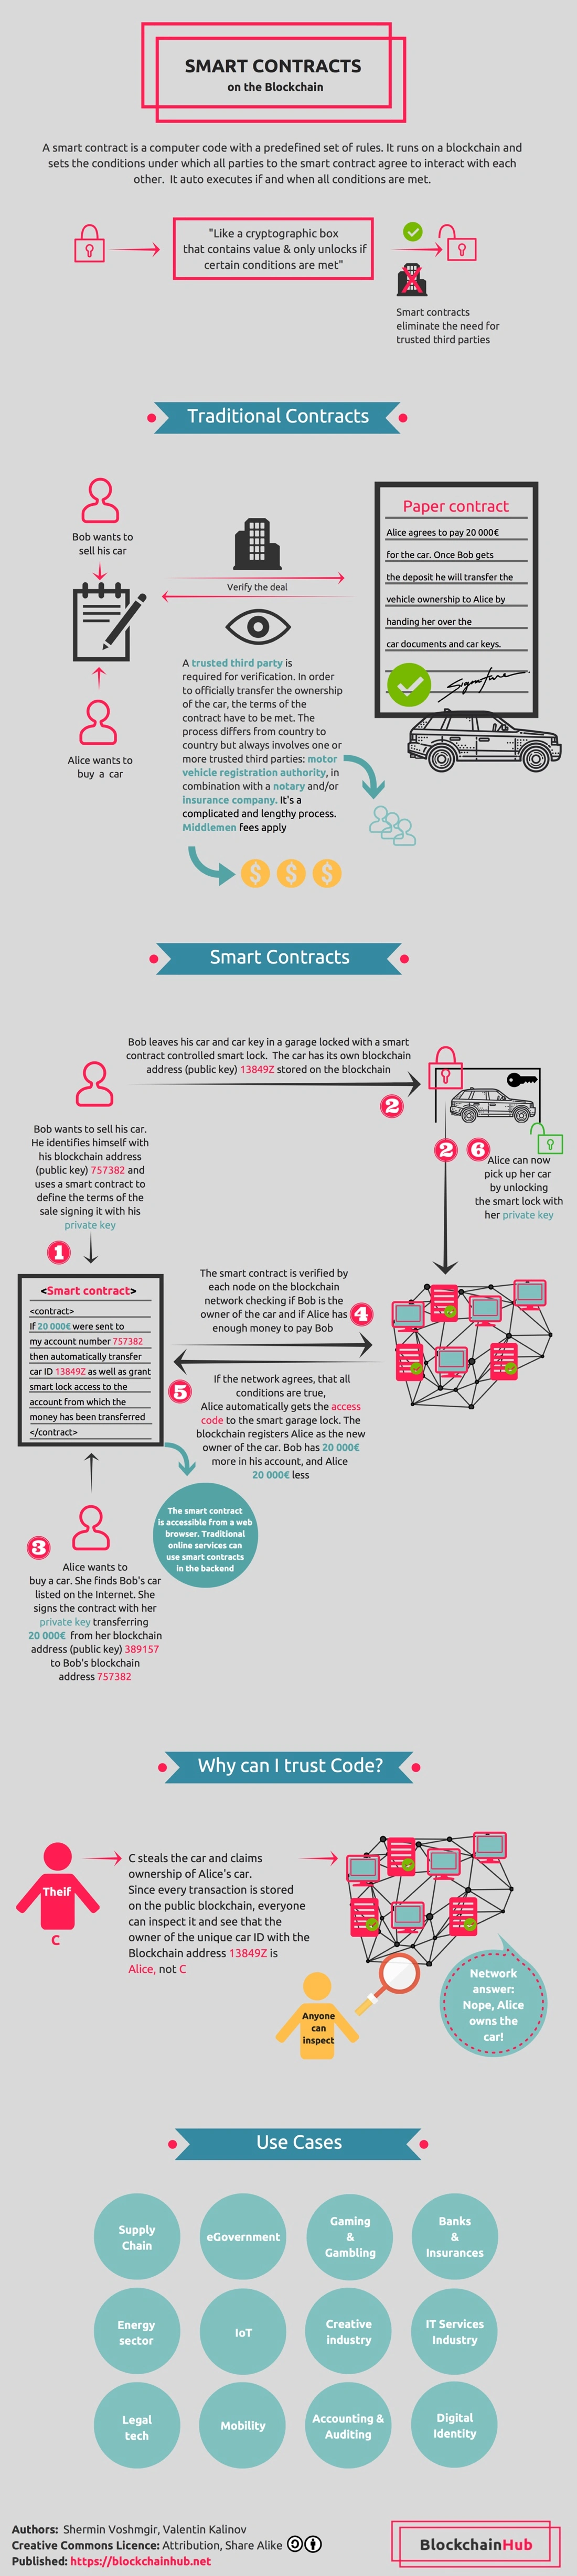 Infographic how smart contracts work